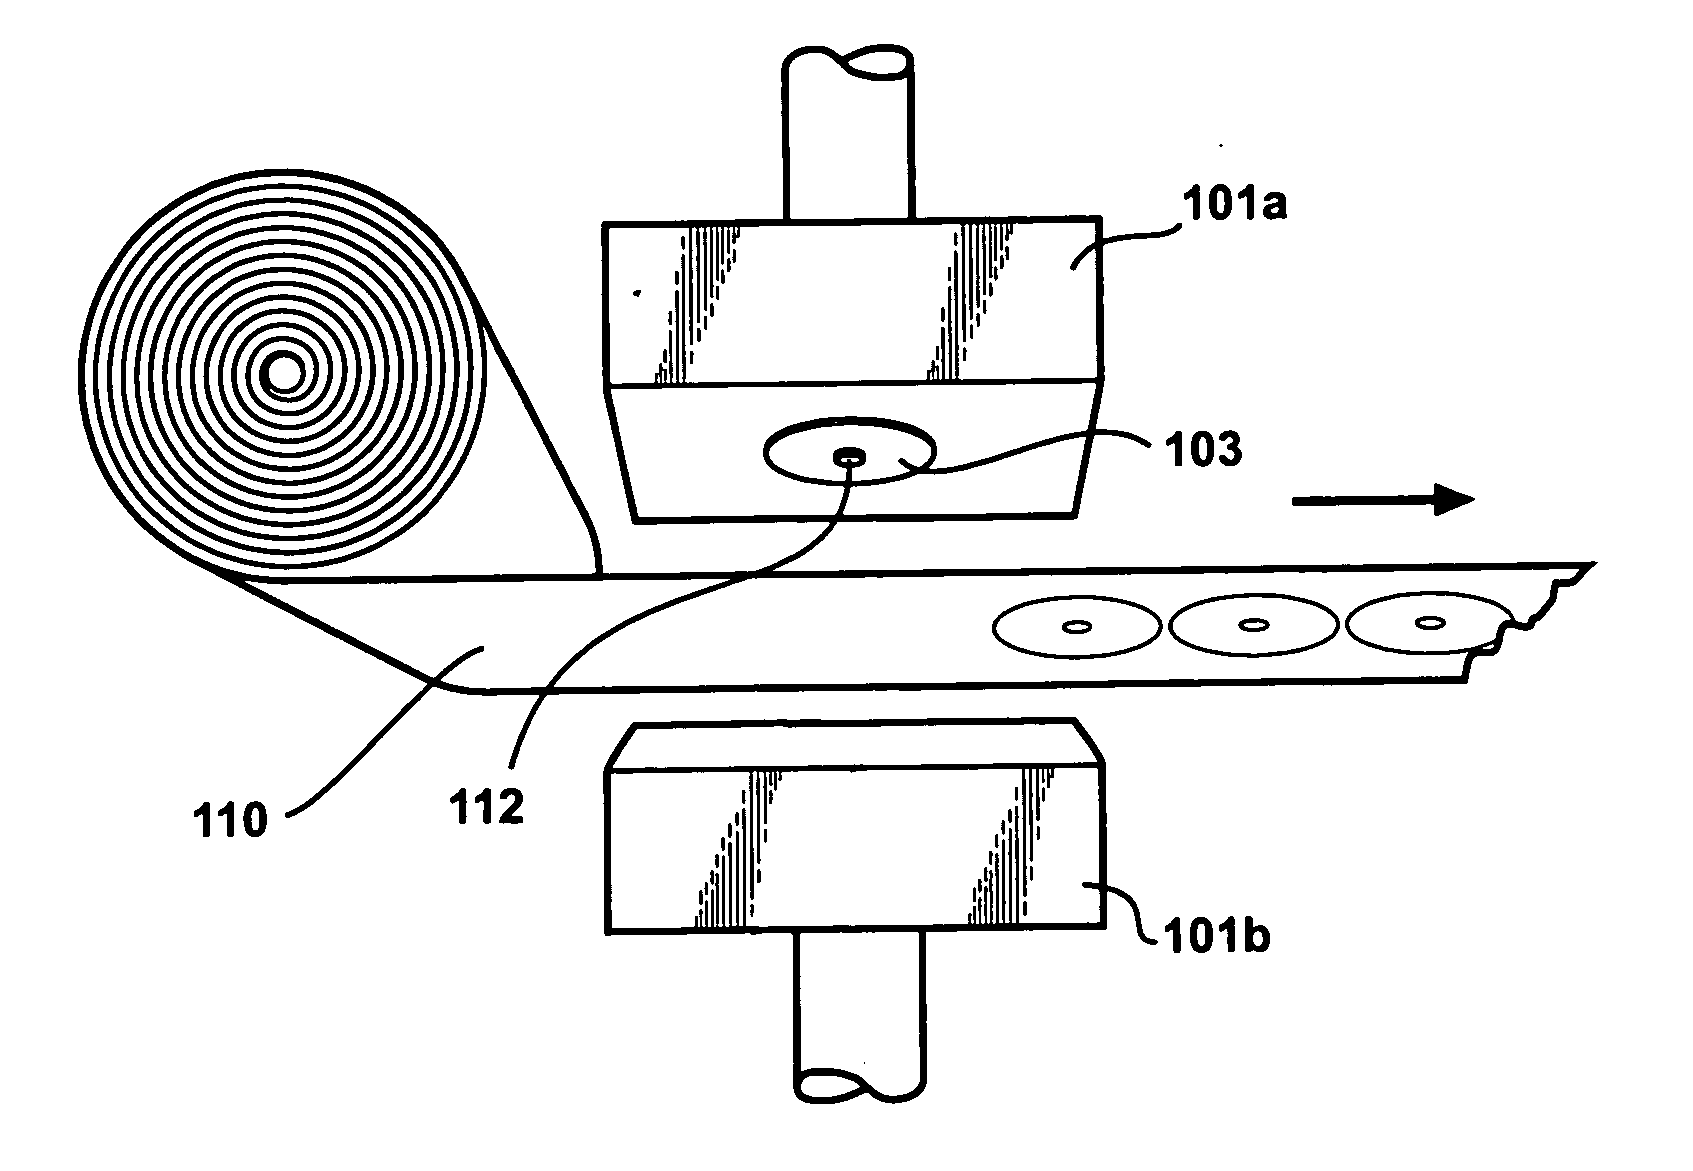 Method and apparatus for producing optical disk substrates